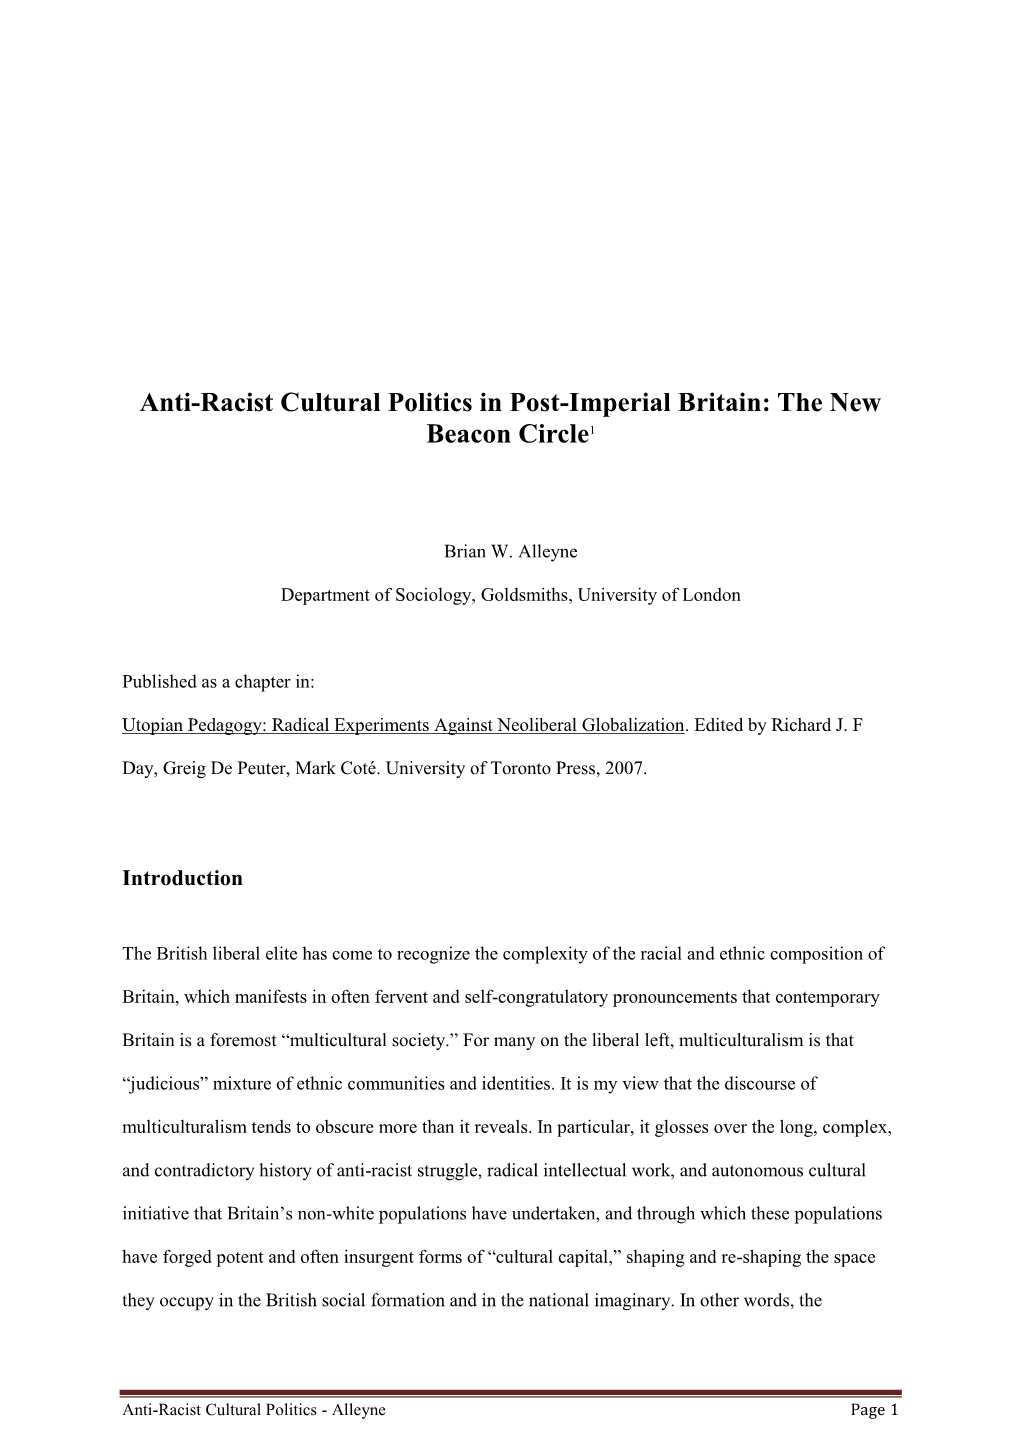 Anti-Racist Cultural Politics in Post-Imperial Britain: the New Beacon Circle1